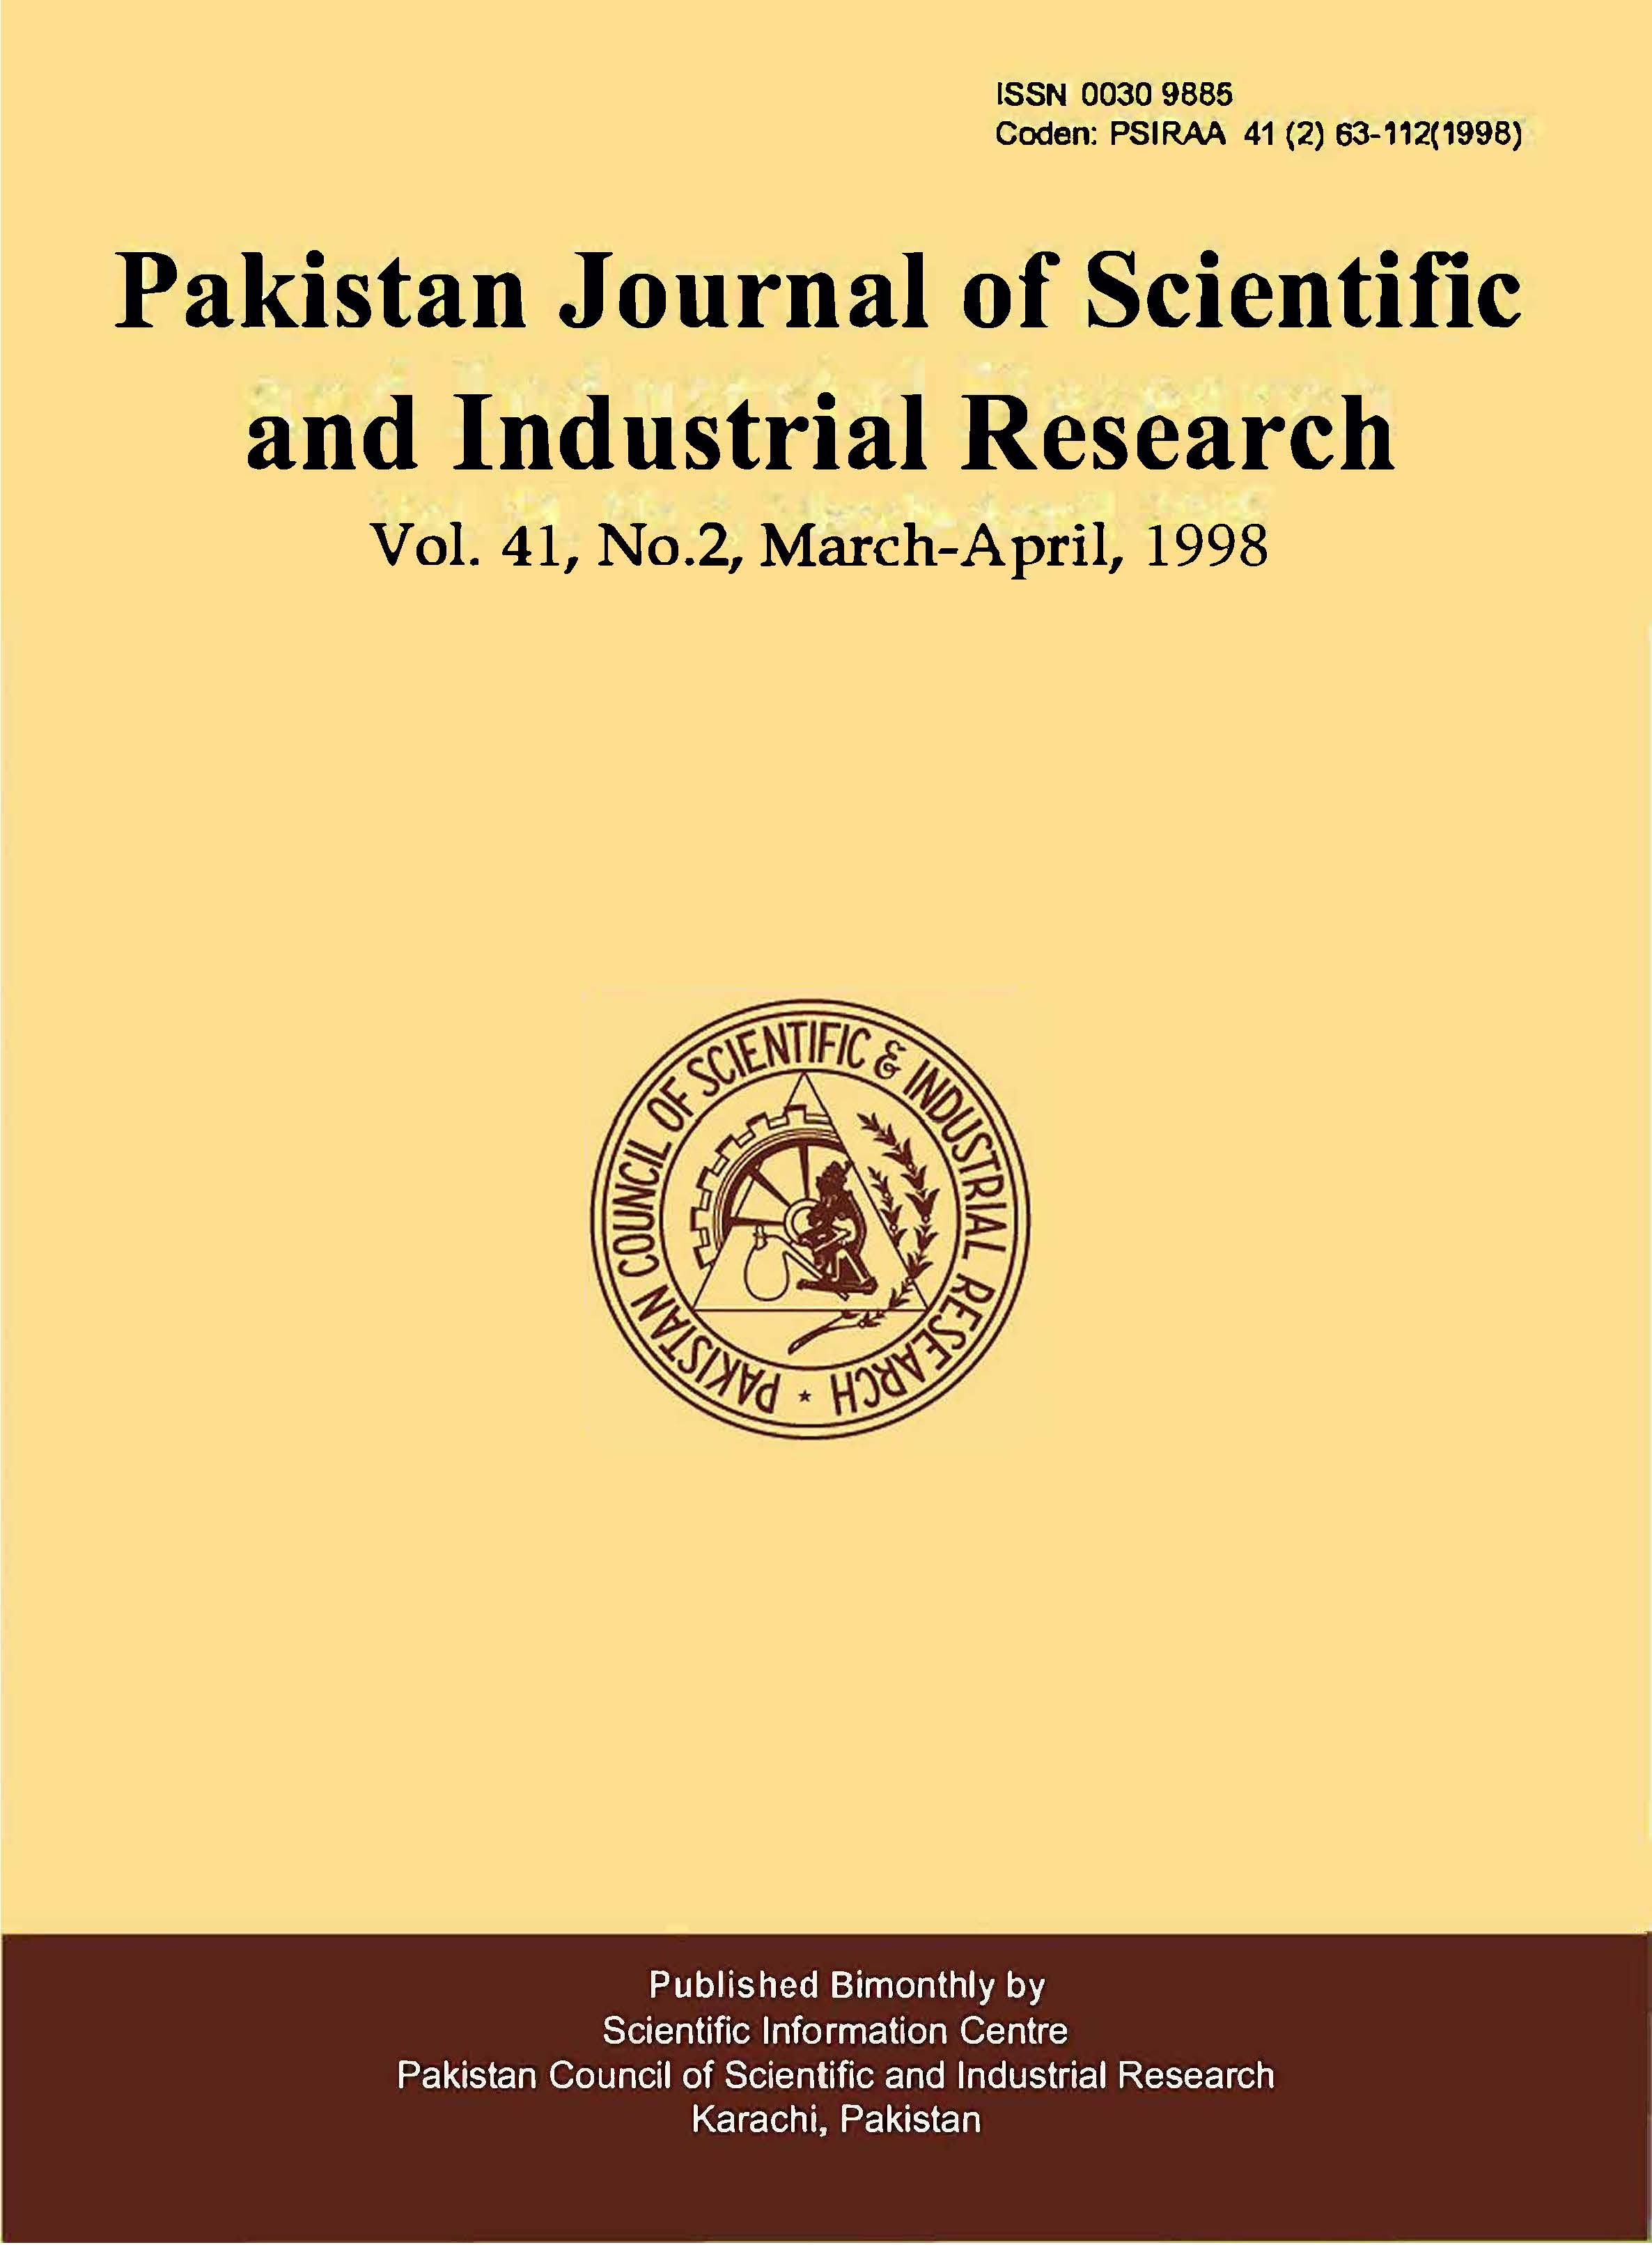 					View Vol. 41 No. 2 (1998): Pakistan Journal of Scientific and Industrial Research
				